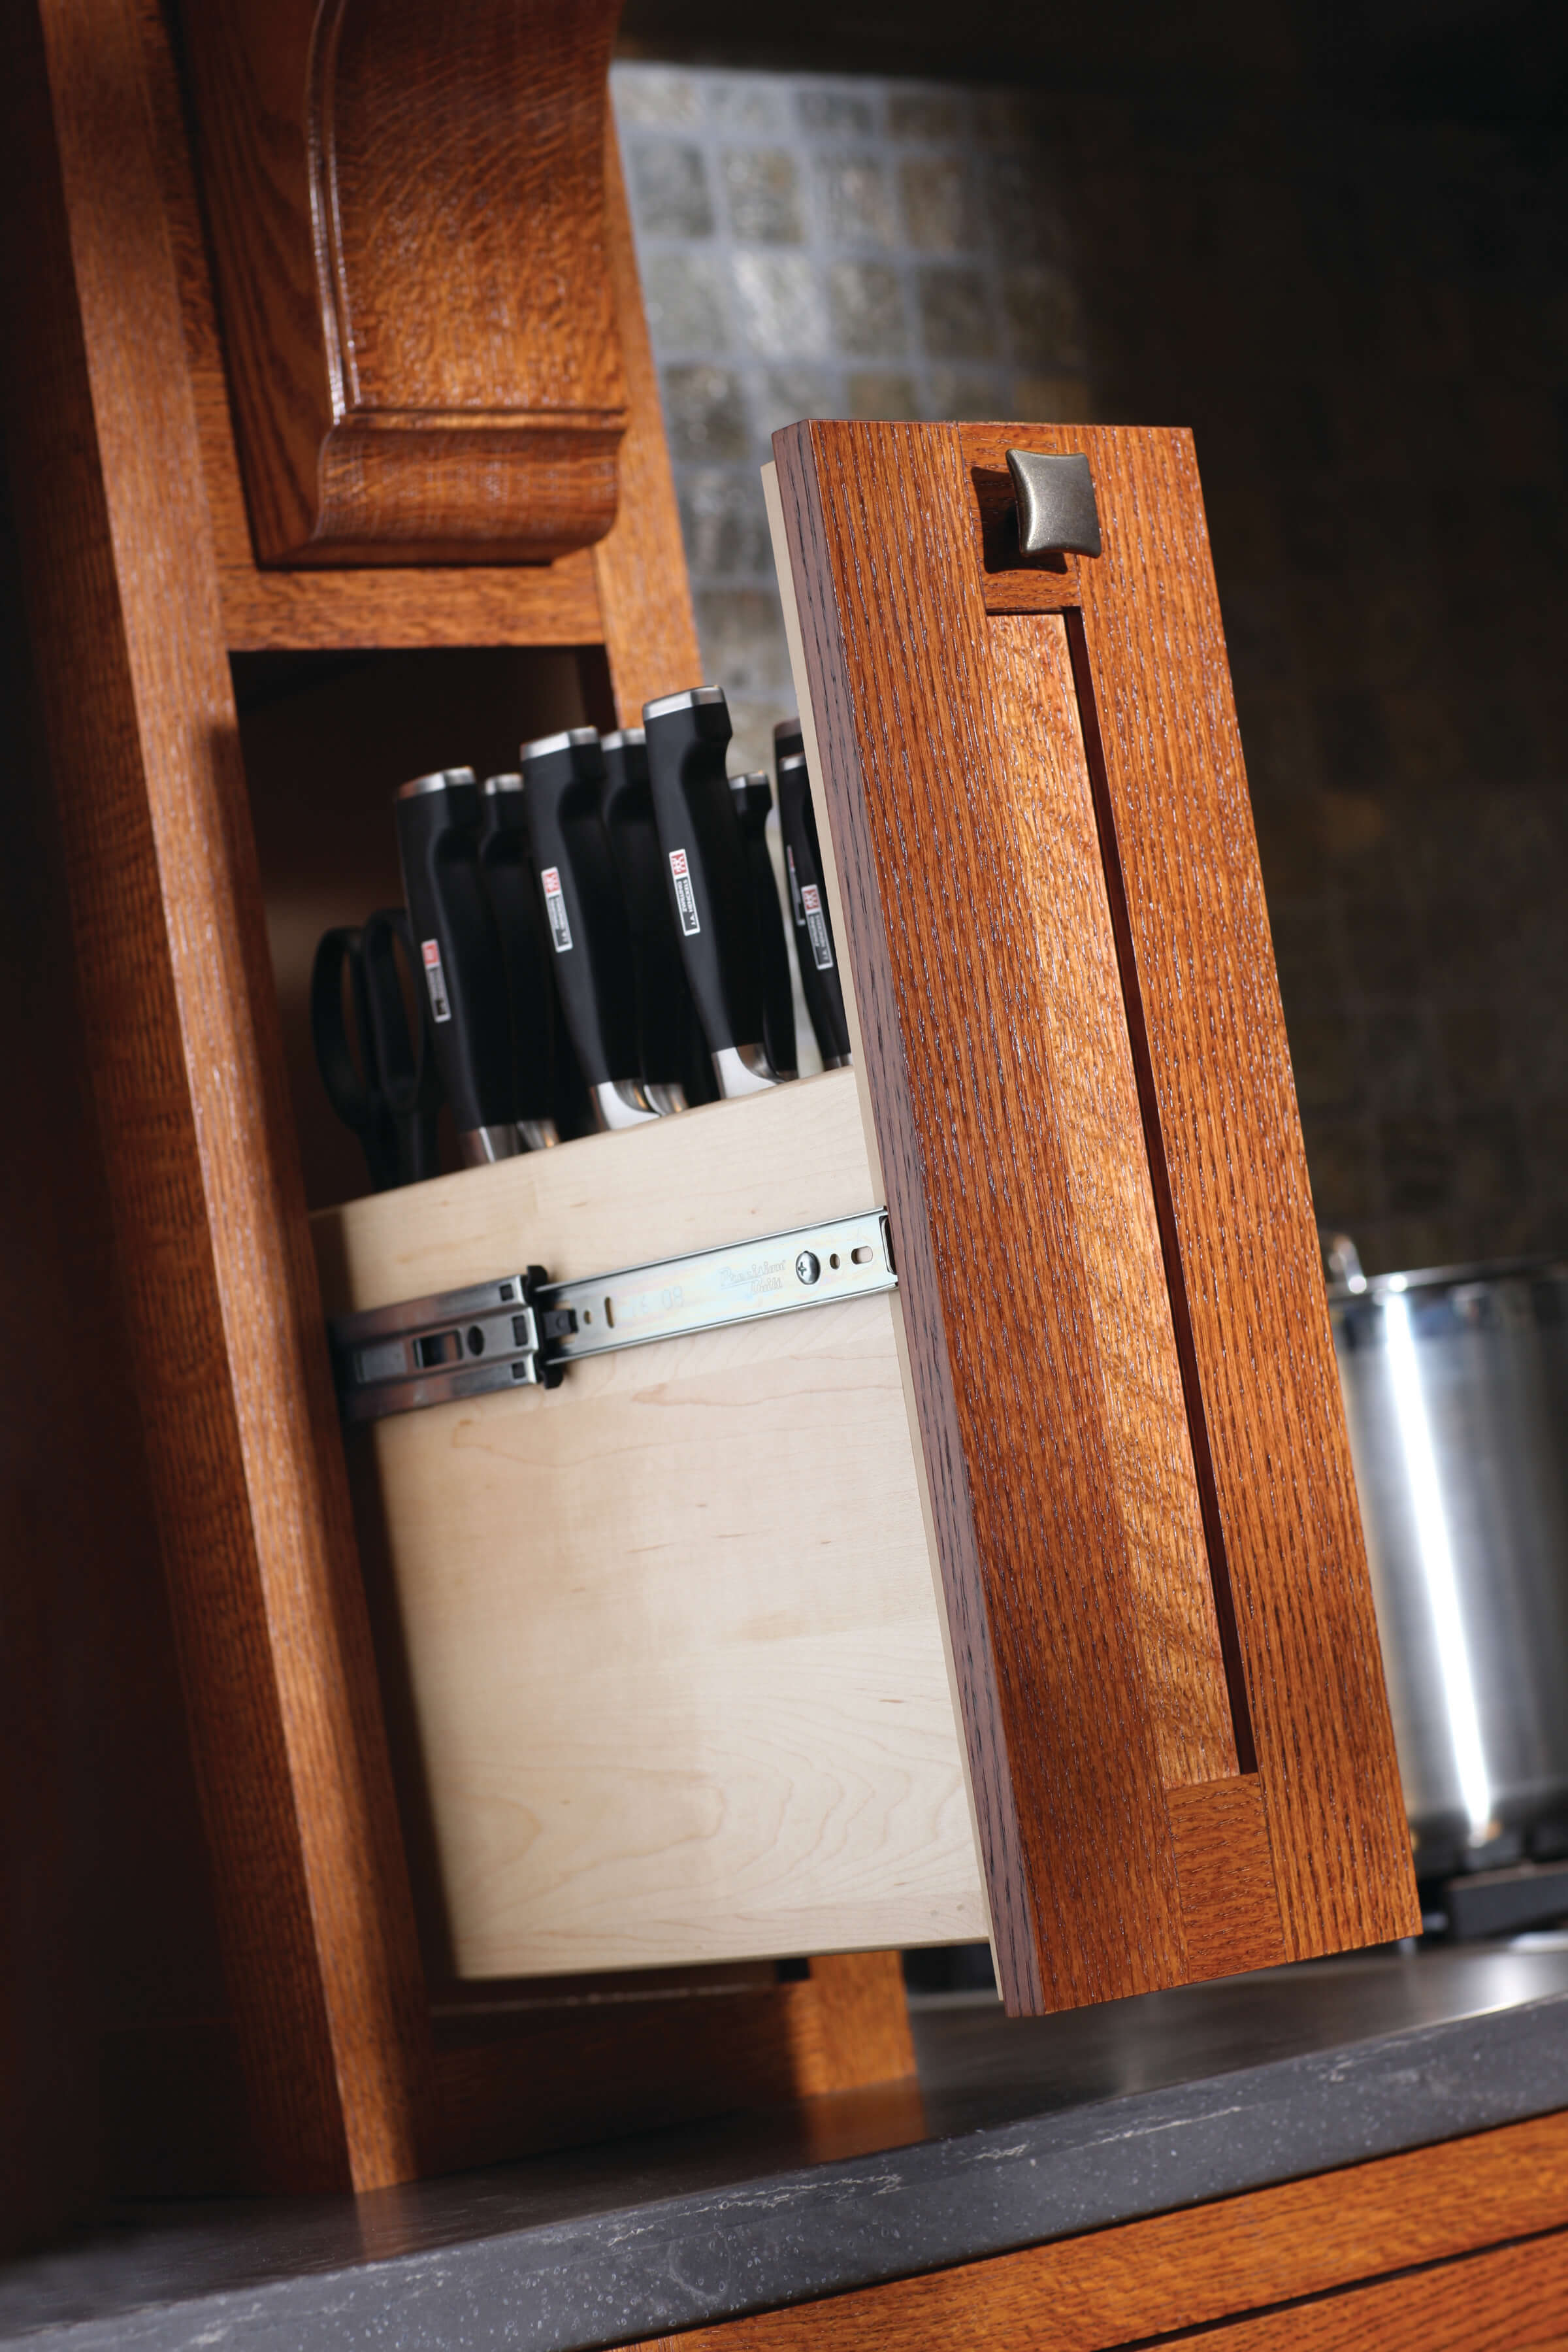 Interiors of cabinets commonly feature customized, well-thoughtout storage solutions like this wood hood pull-out for cuterly.